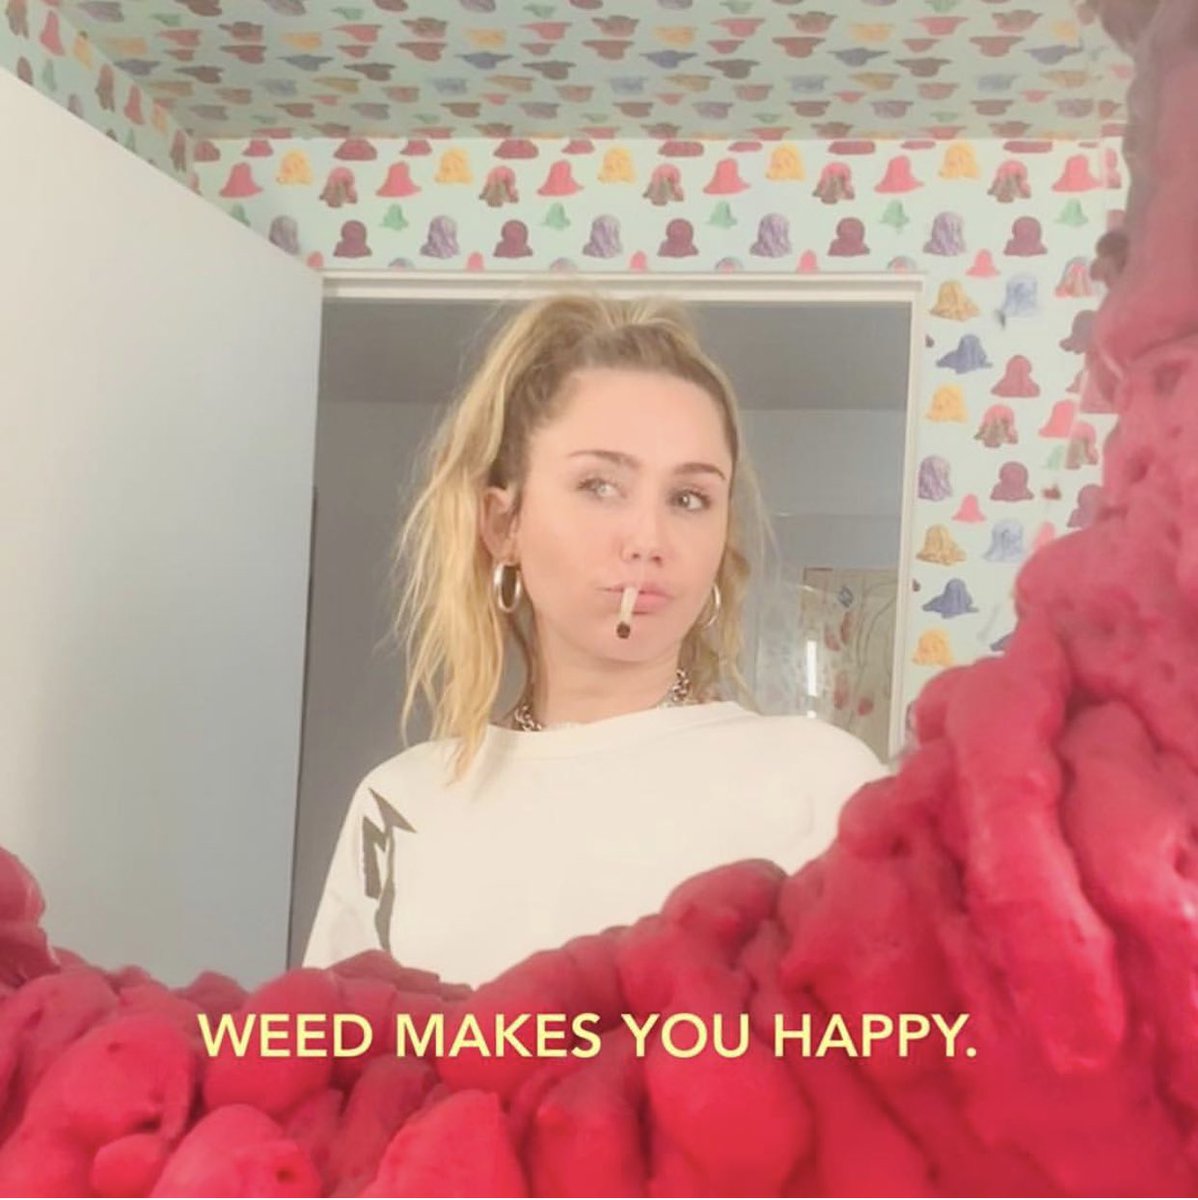 Listen to Miley. She also knows what’s up. https://t.co/DVqv0VxZ8j